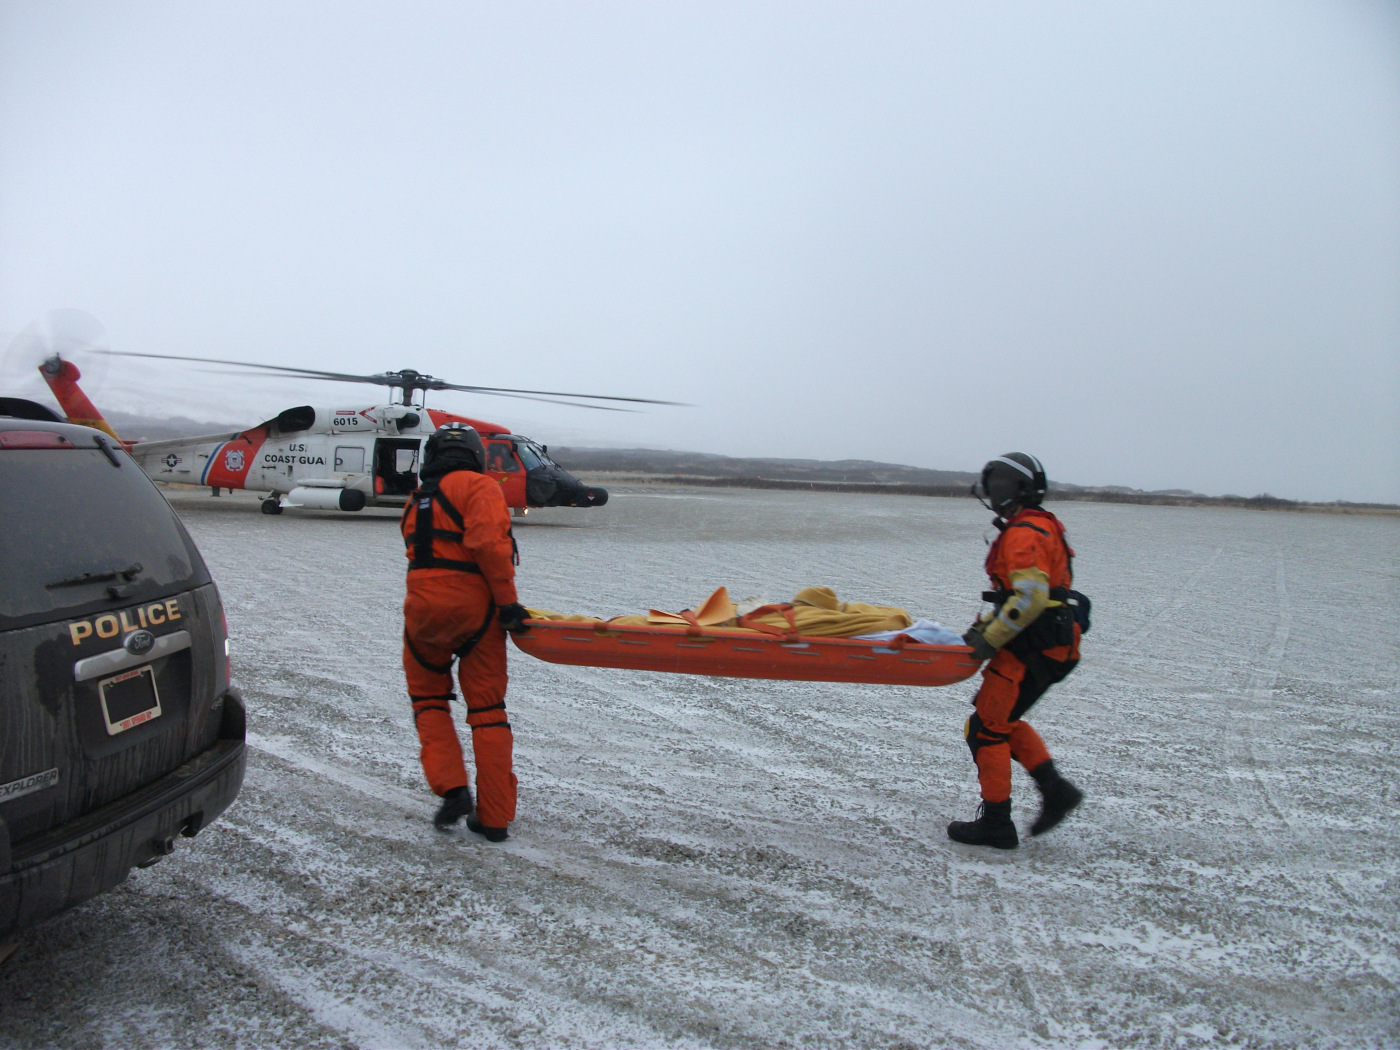 An emergency medical evacuation at the King Cove airstrip. (King Cove Public Safety Department)